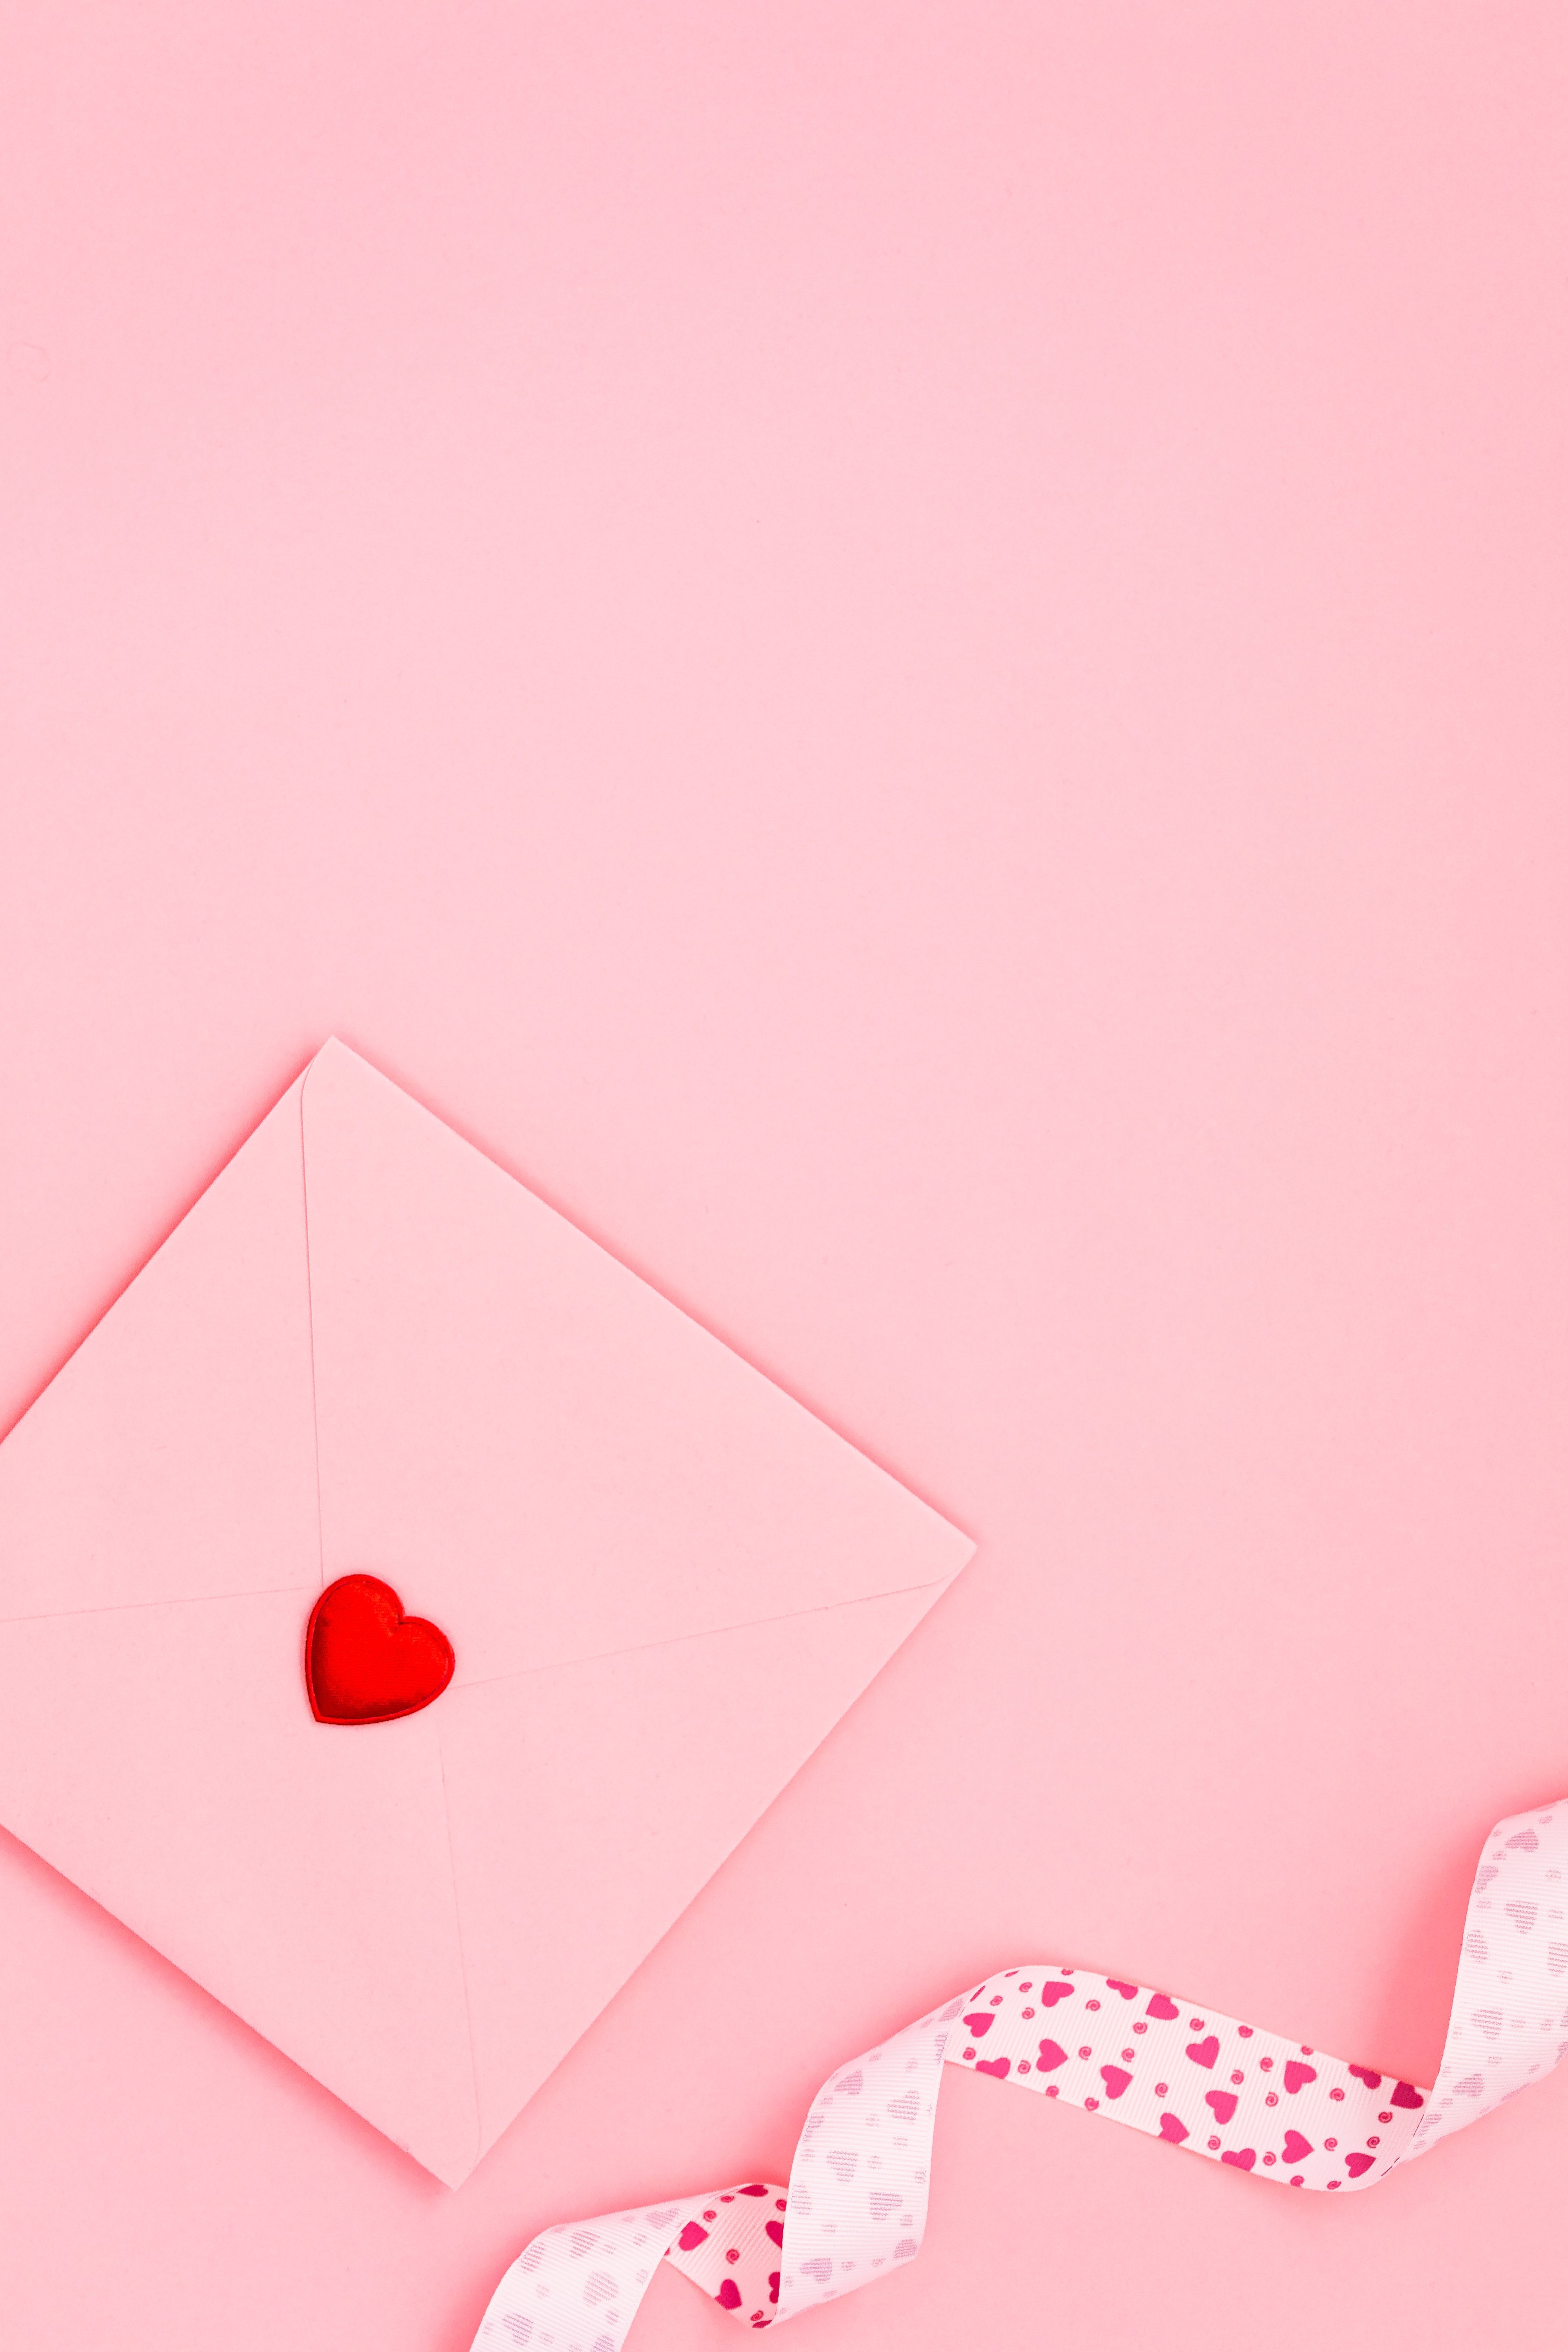 Closed Pink Envelope with Heart Sticker · Free